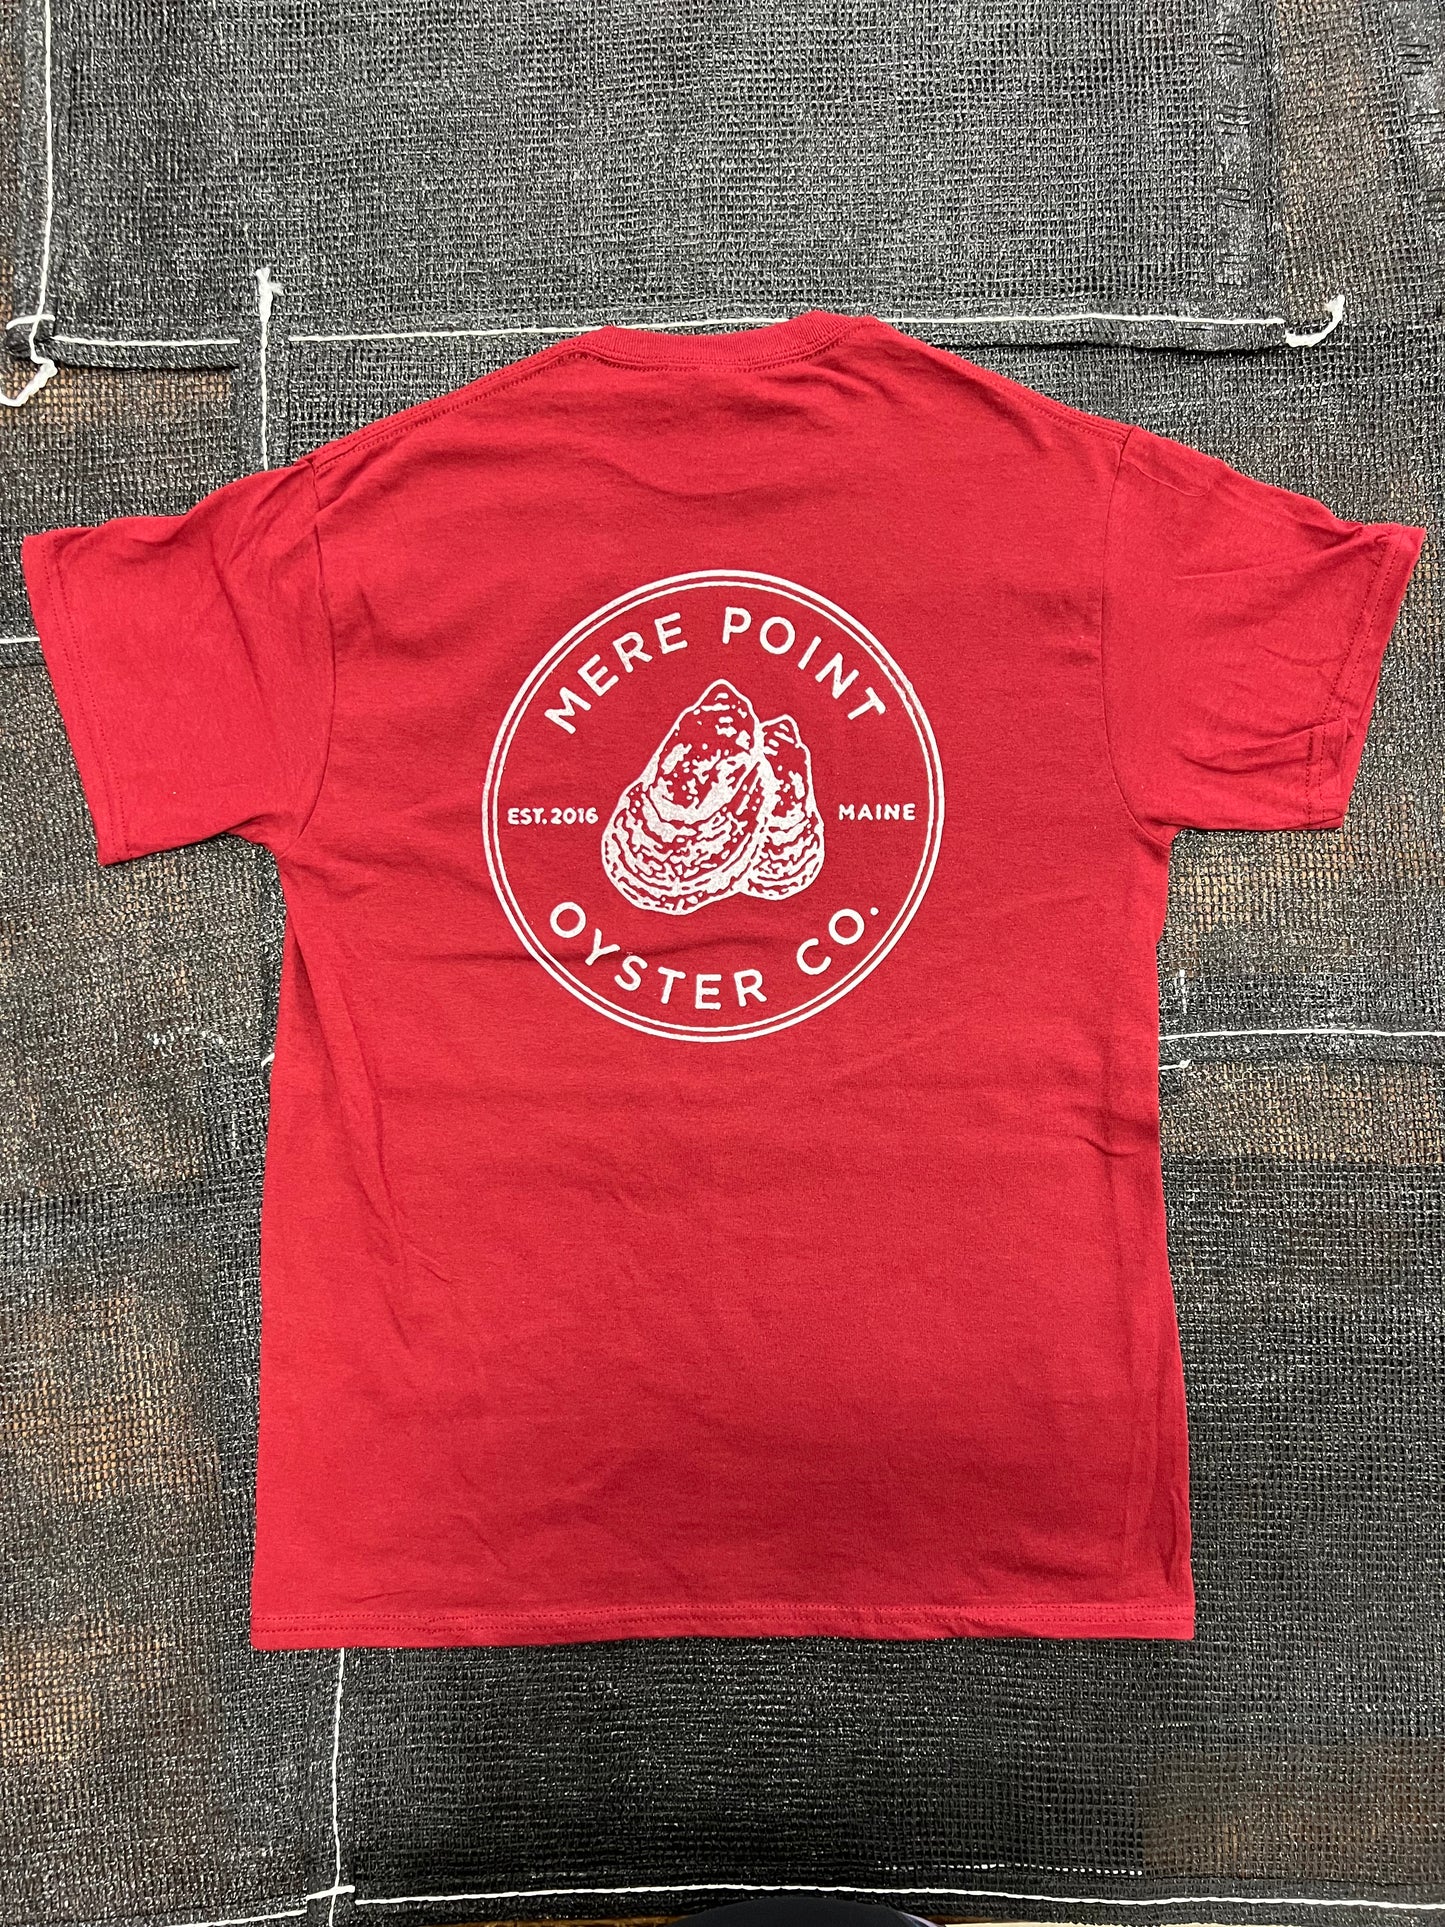 Mere Point Oyster Co. T-Shirt